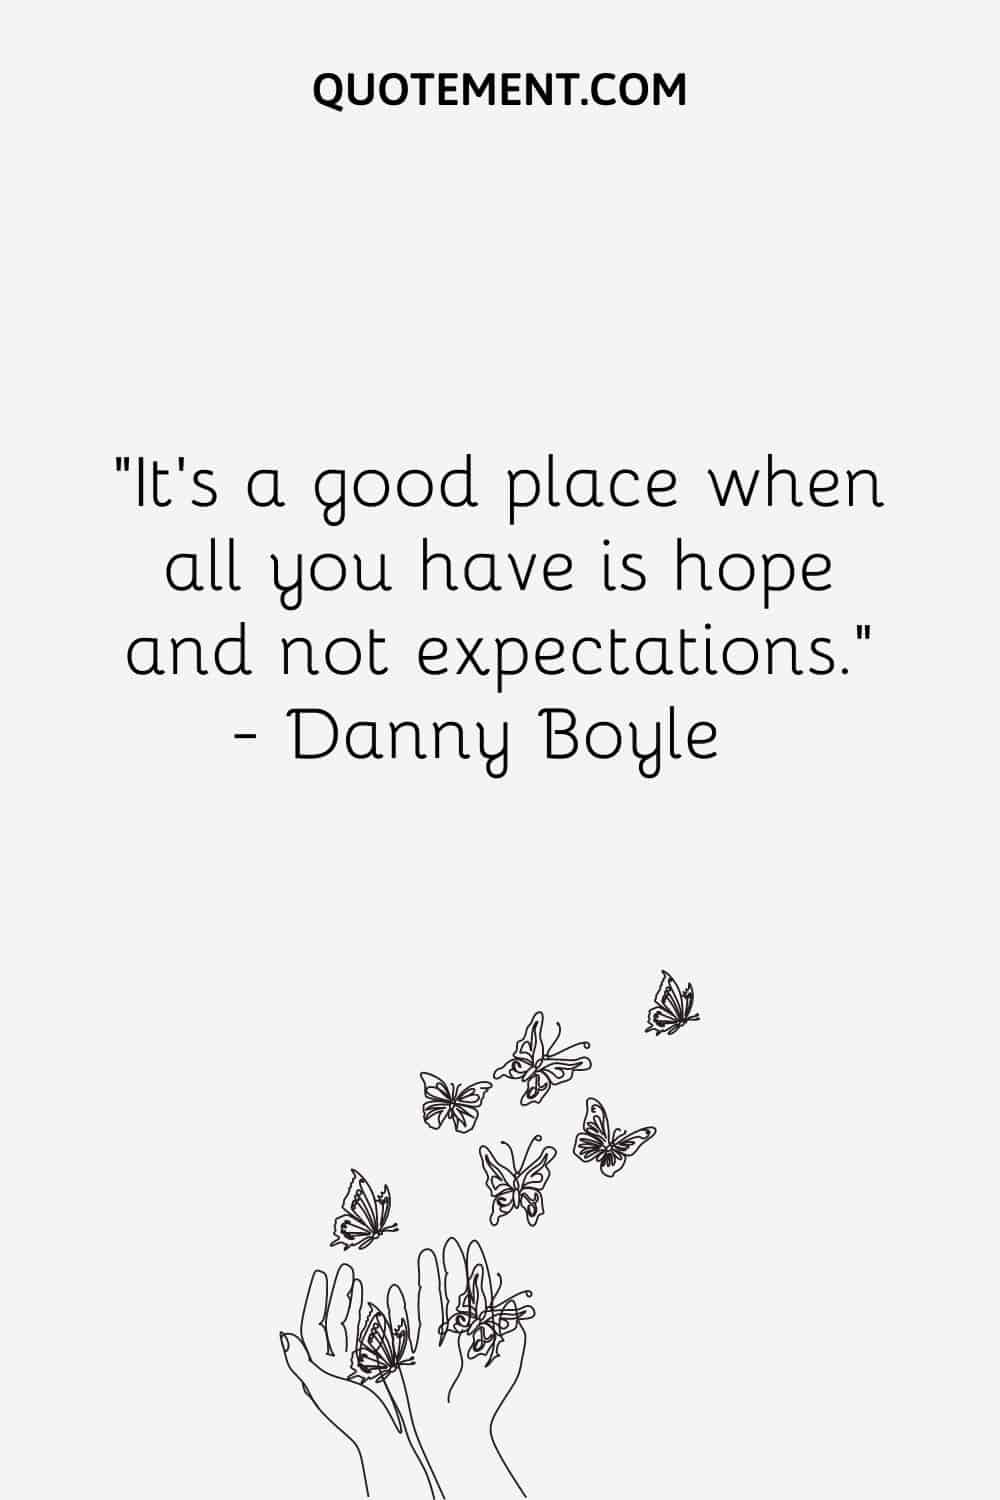 It’s a good place when all you have is hope and not expectations